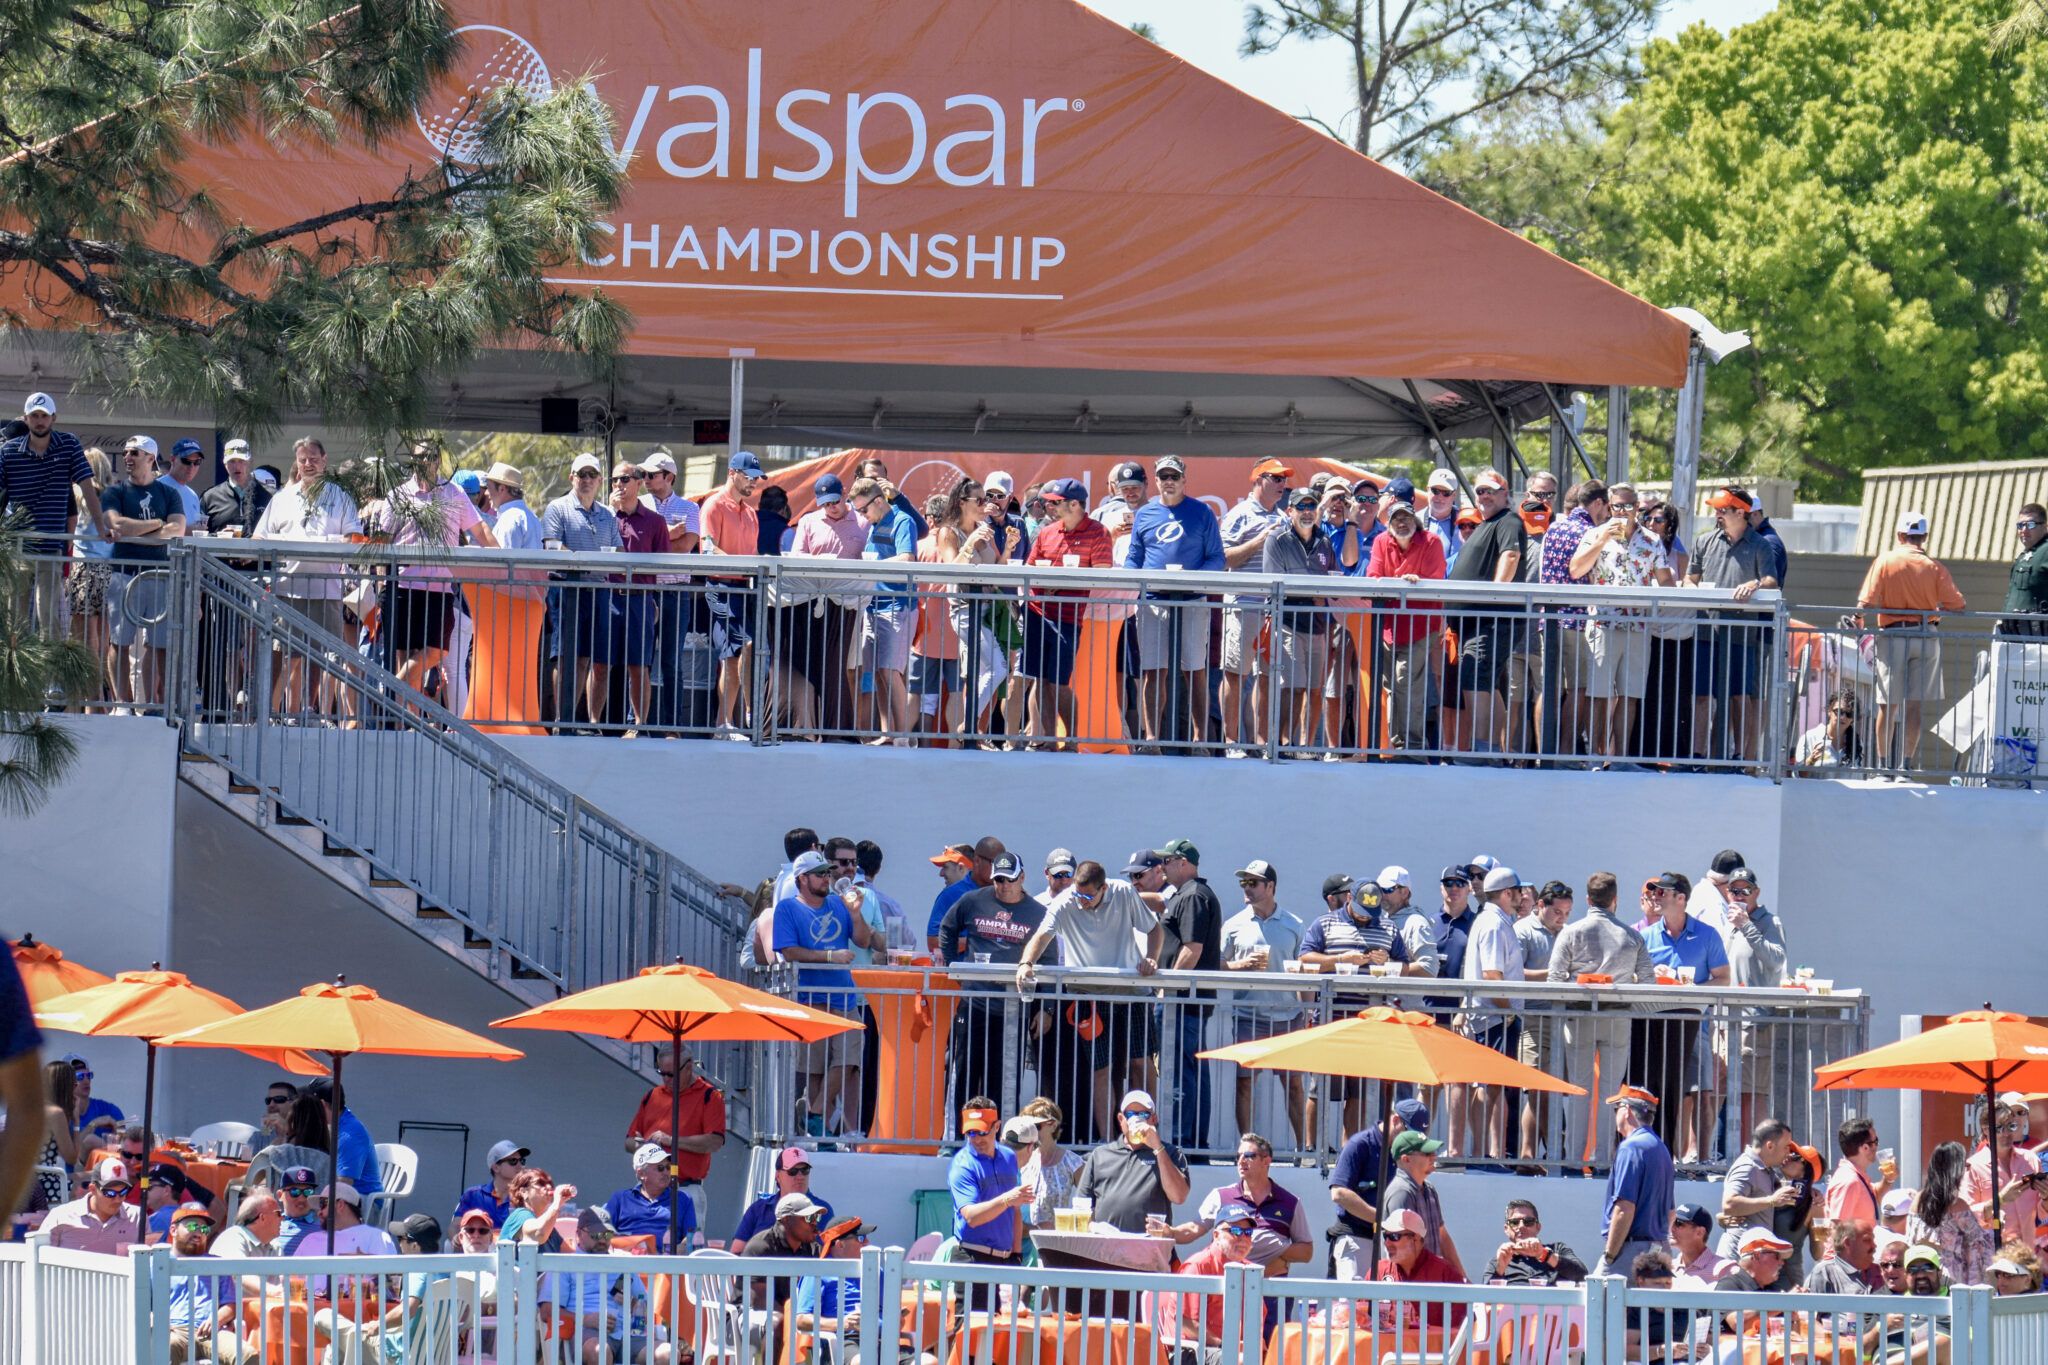 How to do the Valspar Championship in style Tampa Bay Business & Wealth